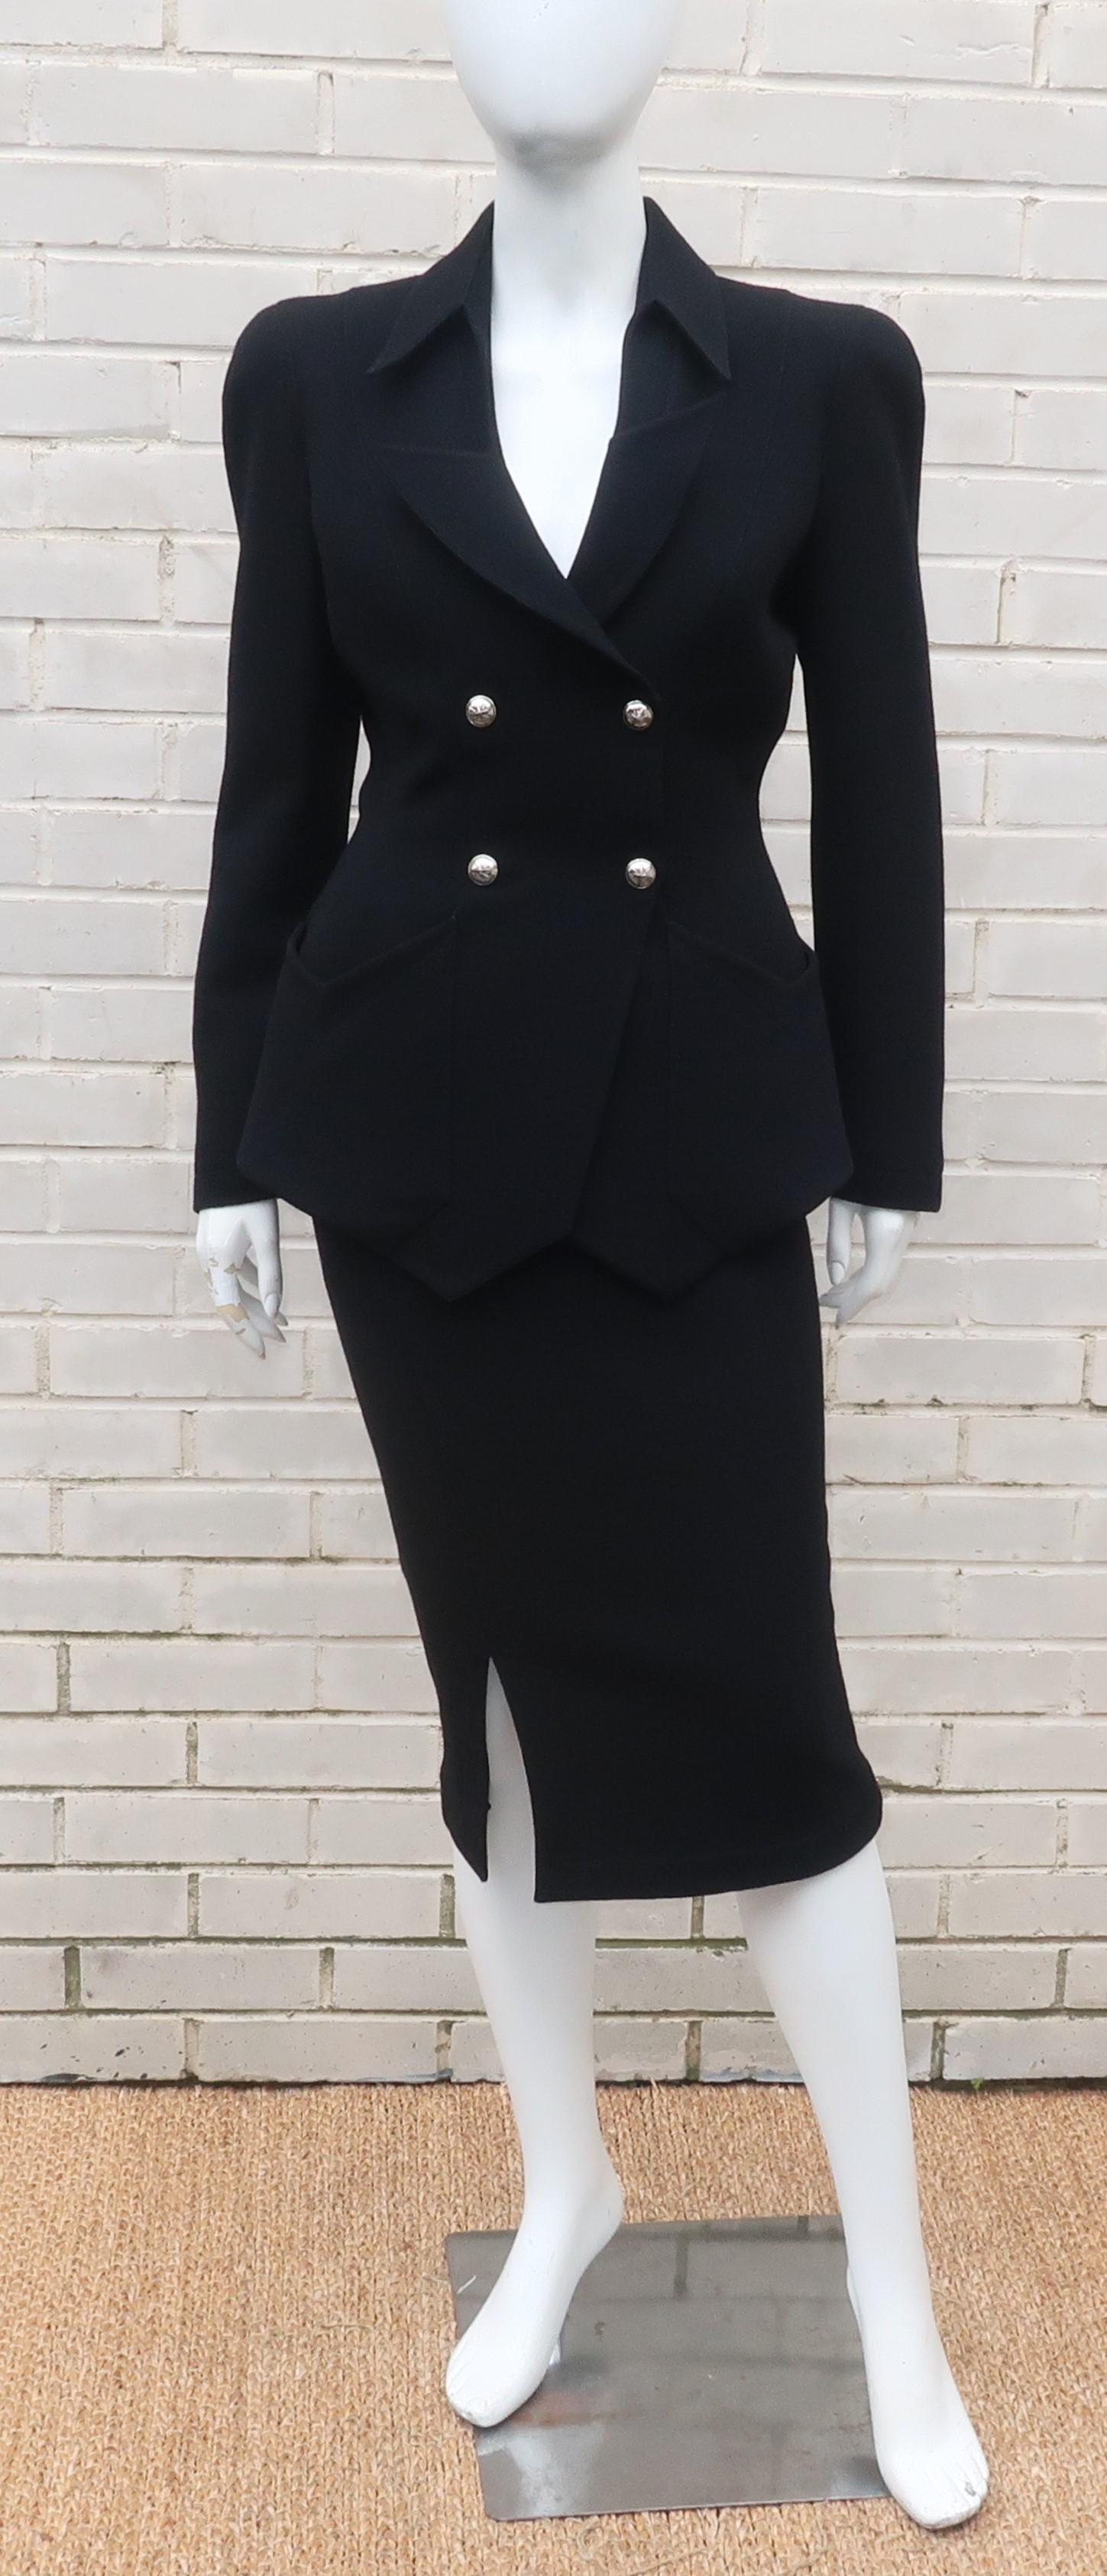 French designer Thierry Mugler is a master of the innovative suit combining style details from the 1940's with a futuristic silhouette which honors the strong feminine form.  This black skirt suit is anything but basic with a stylized jacket shaped